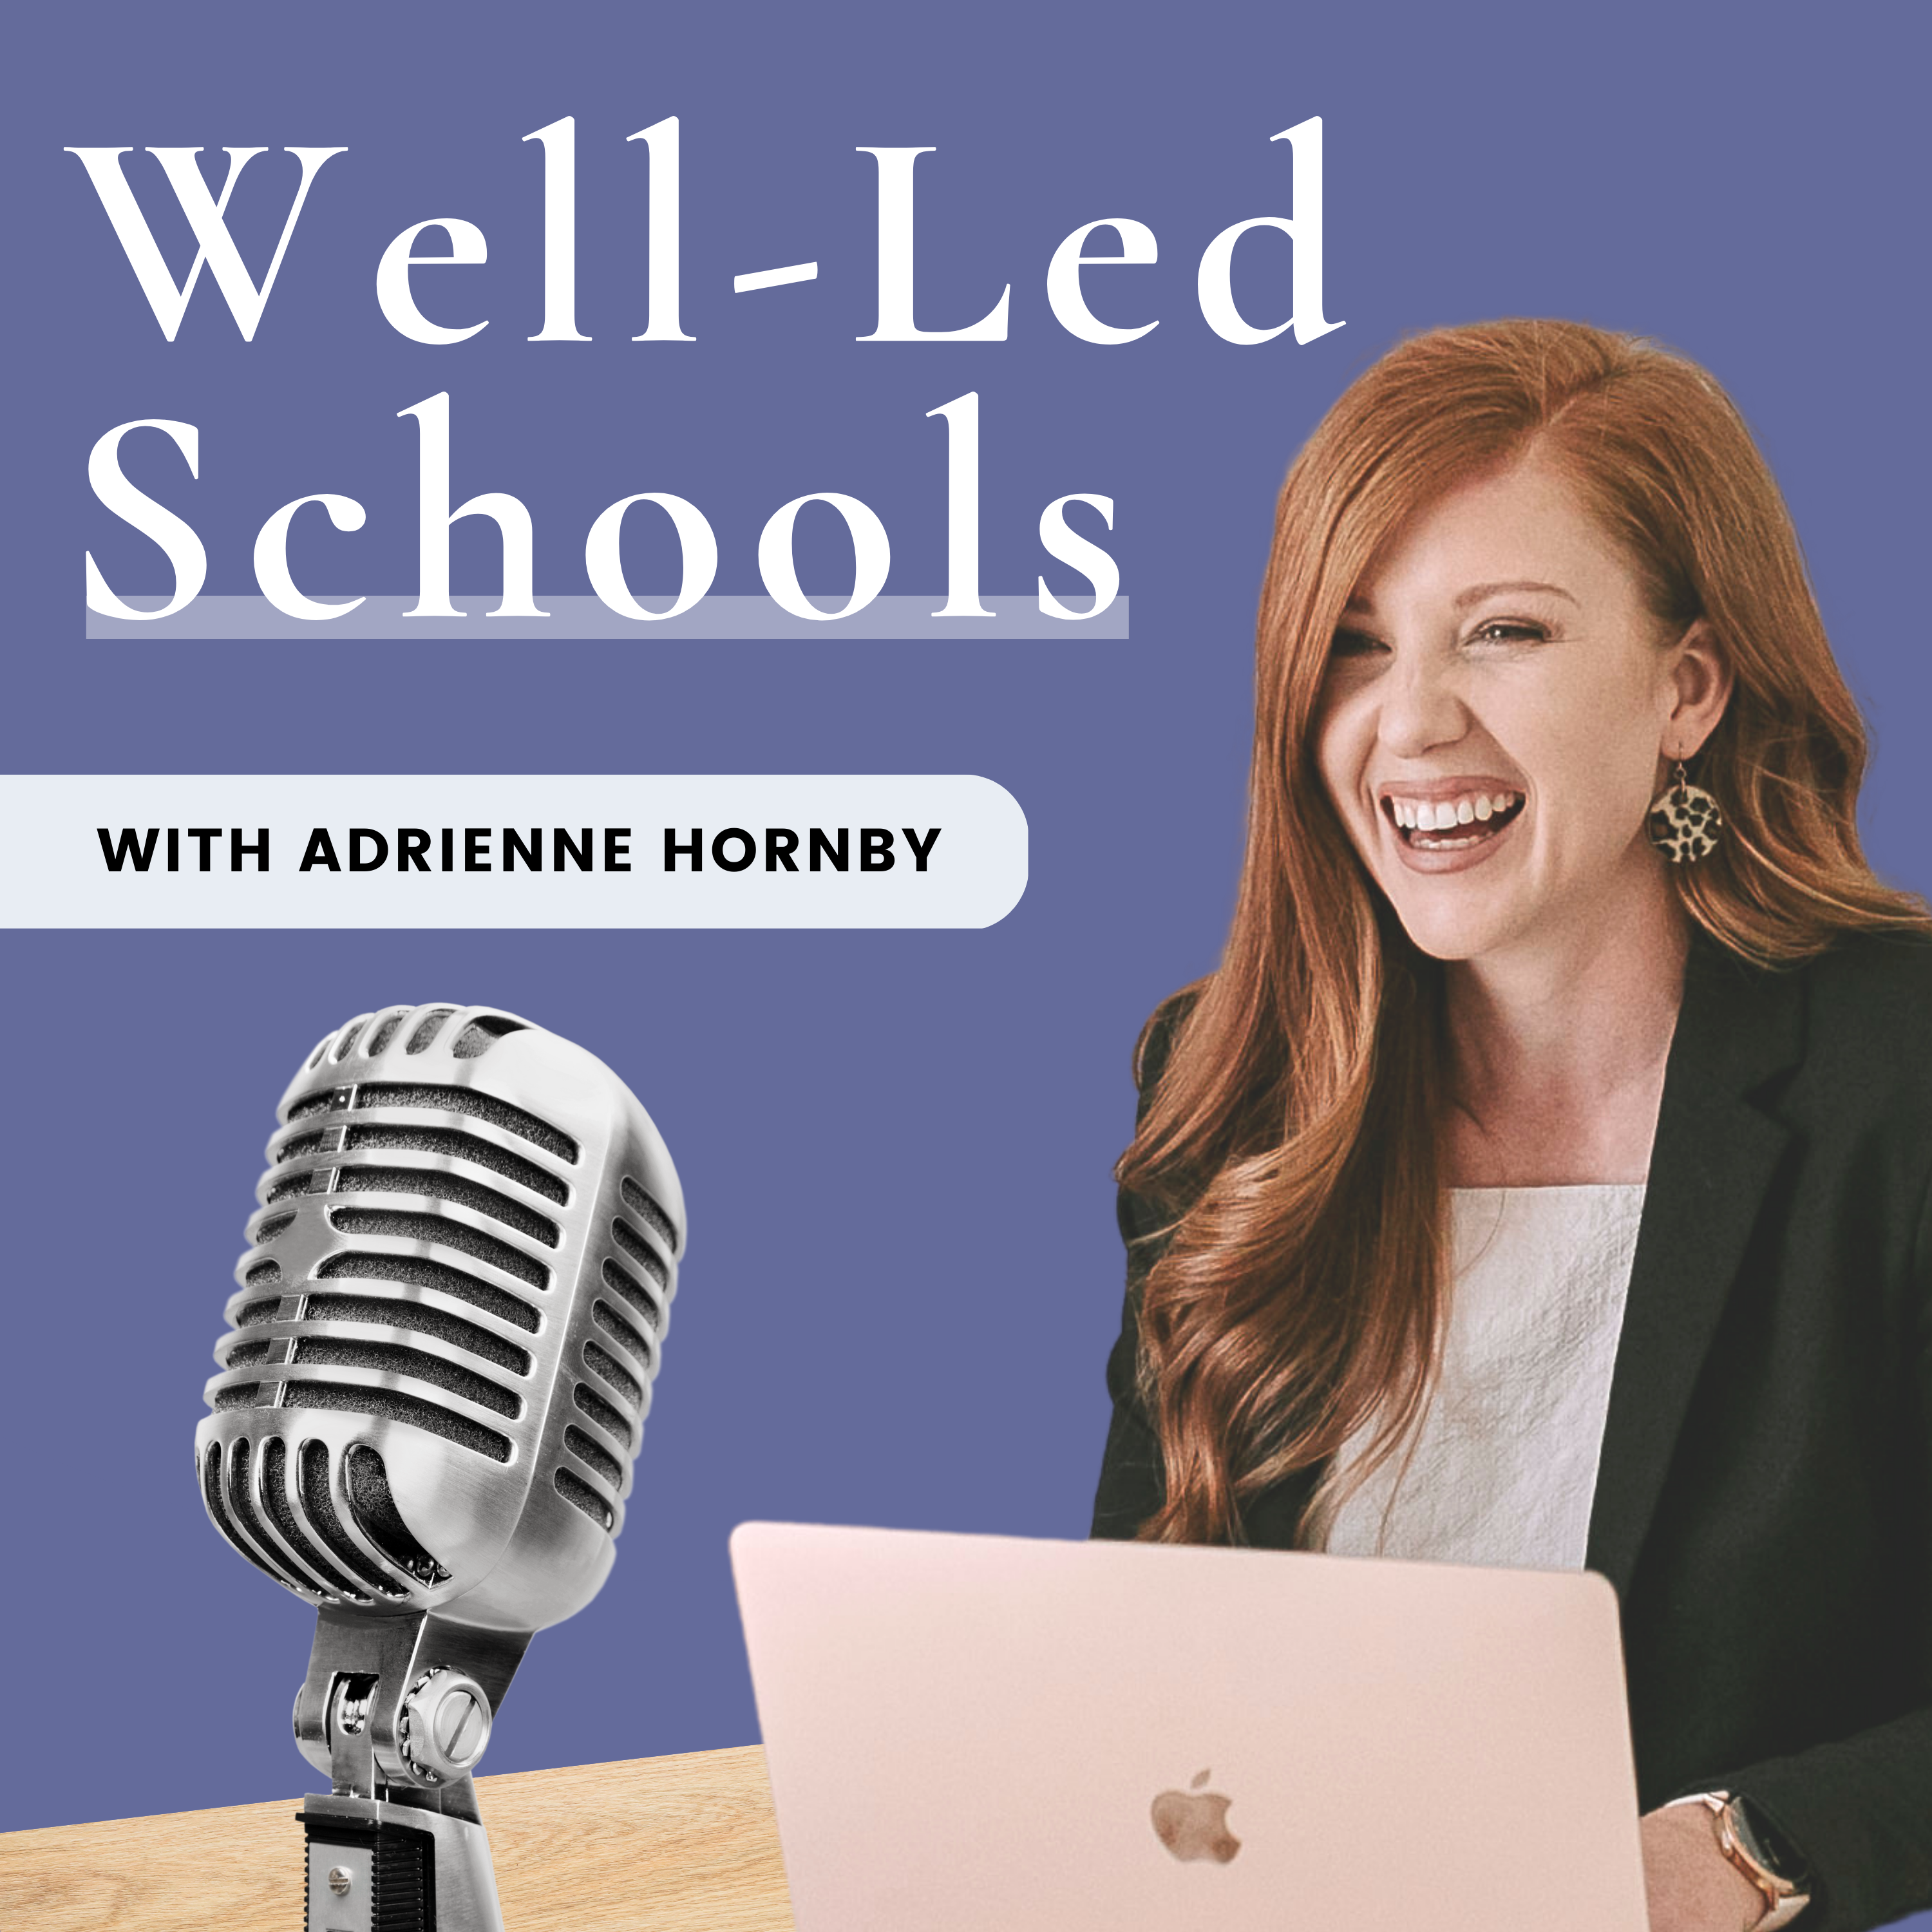 EP 25: A Growth Map to Improved Wellbeing in Schools With Aimee Parkinson